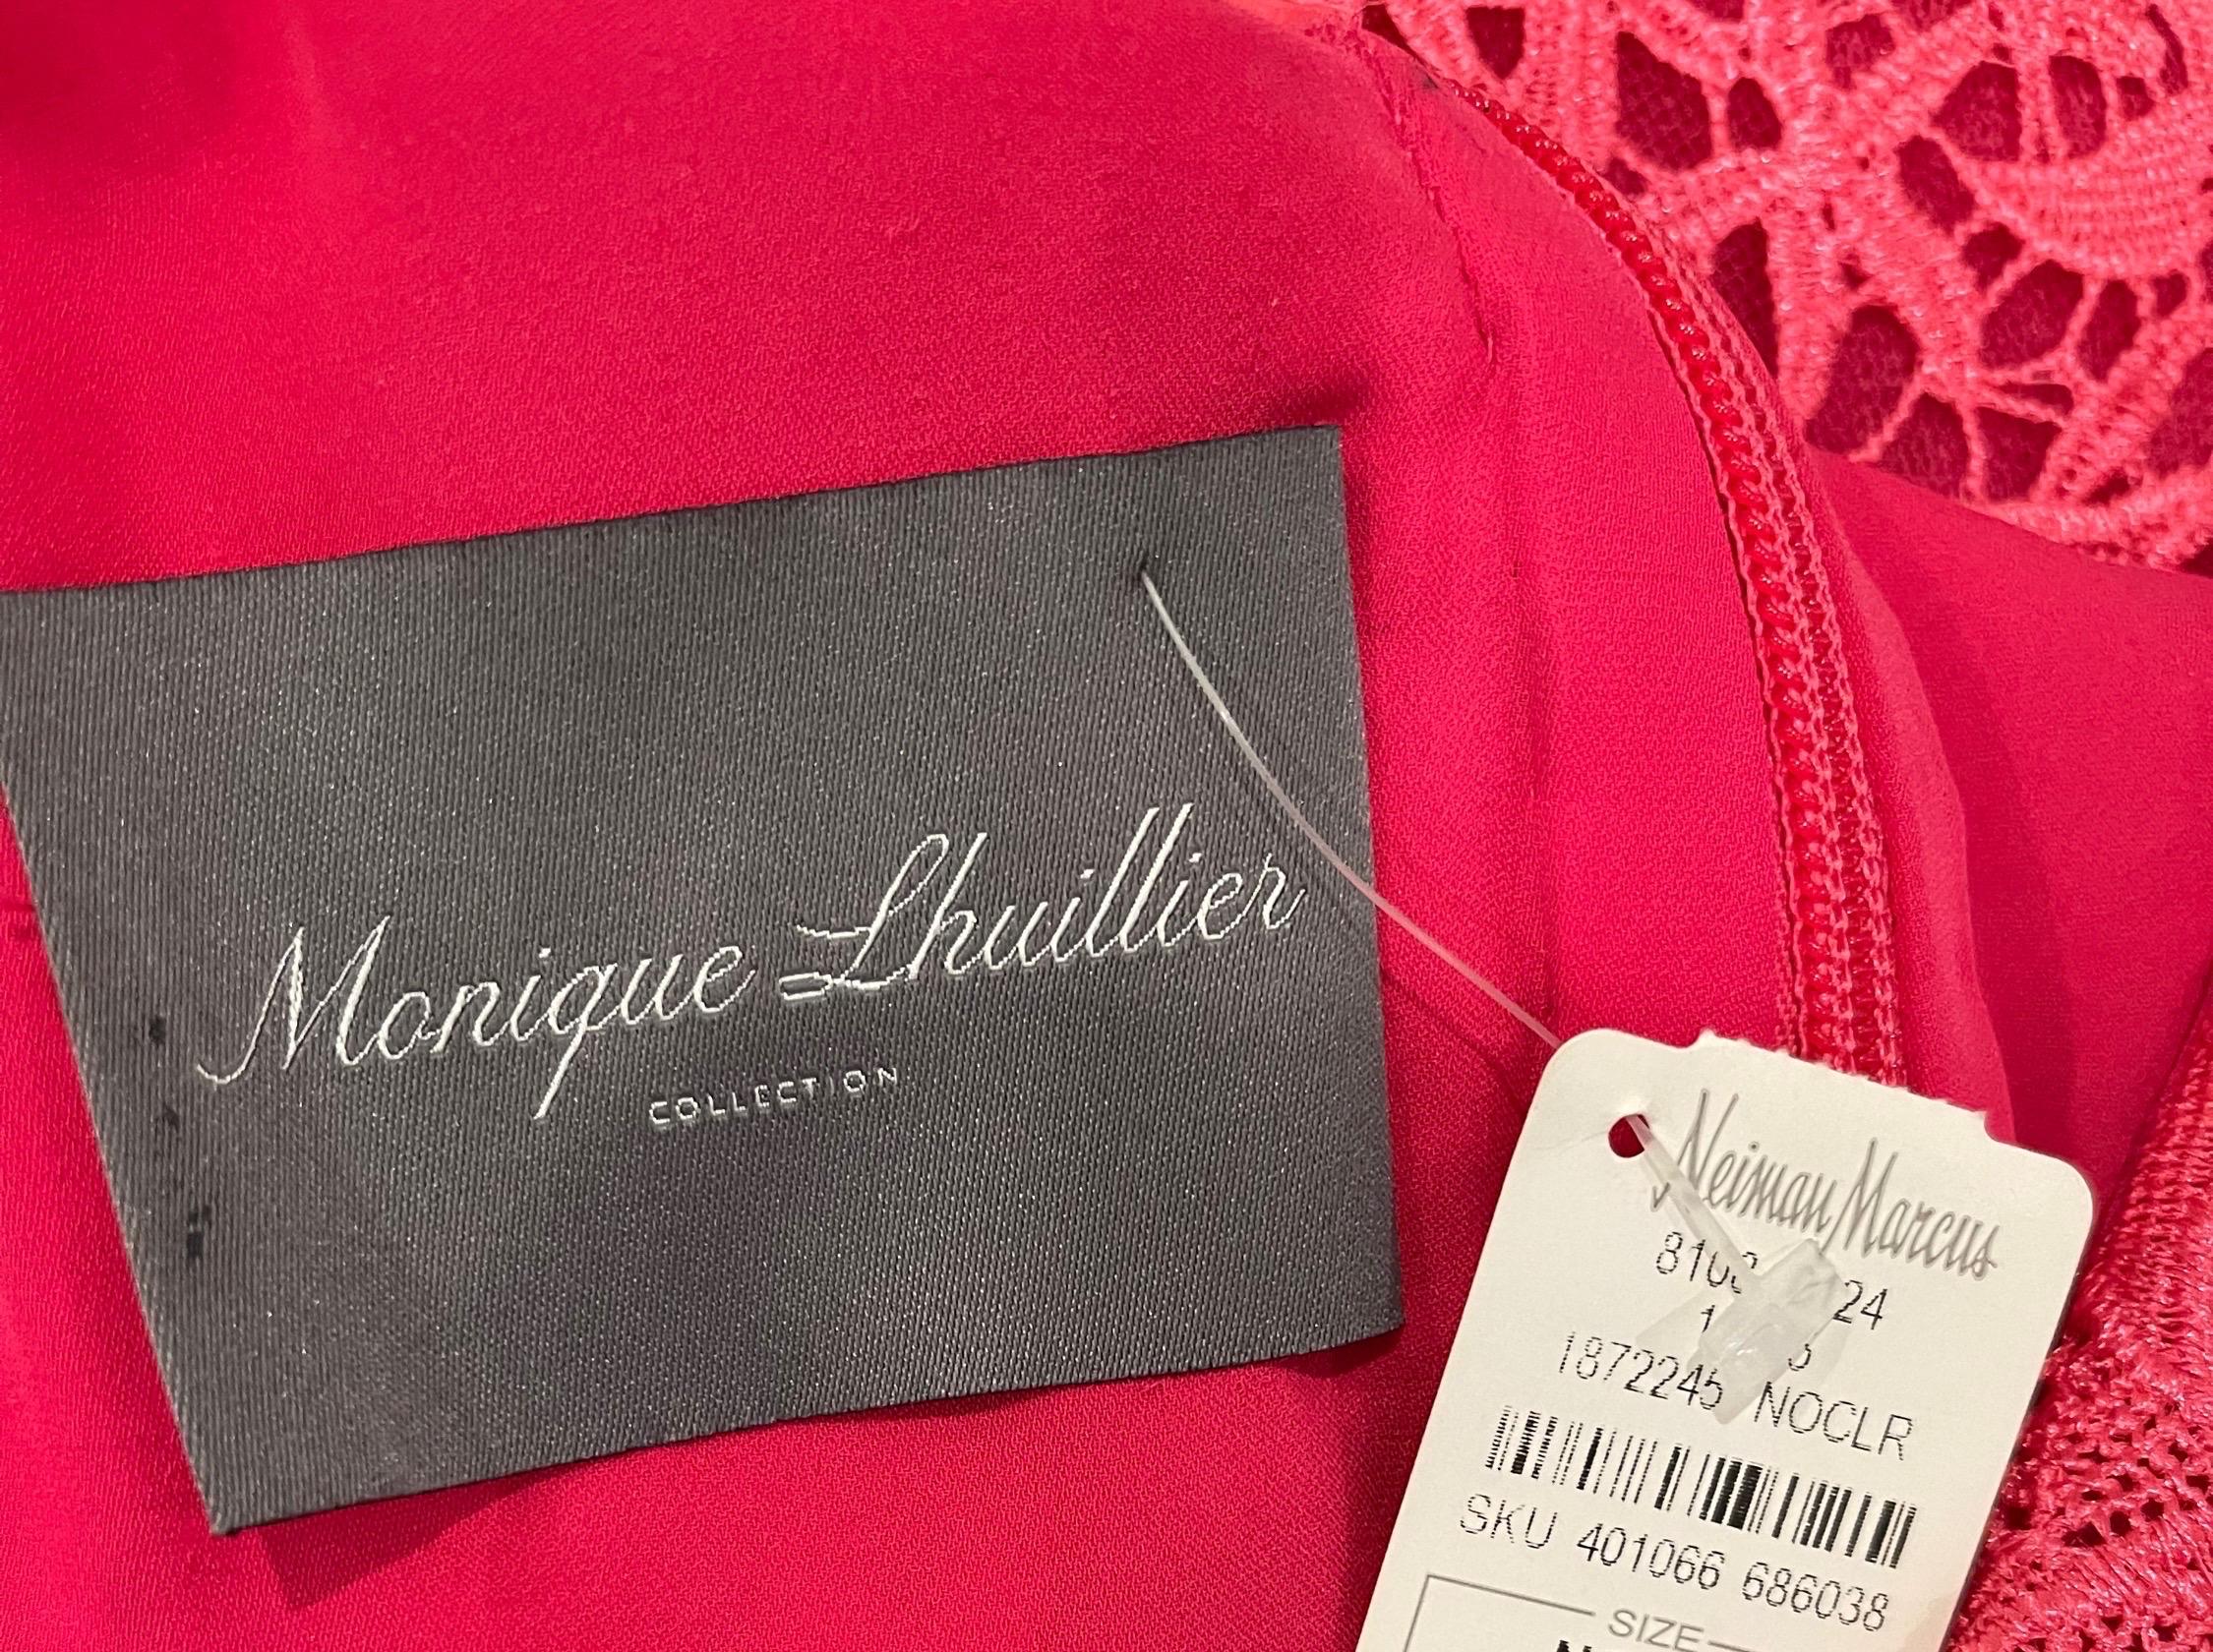 Gorgeous new with tags MONIQUE LHUILLIER hot pink lace fit n/ flare sleeveless dress! Features a tailored bodice with a full forgiving skirt. Hidden zipper up the back with hook-and-eye closure. Fully lined. Perfect for any day or evening event.